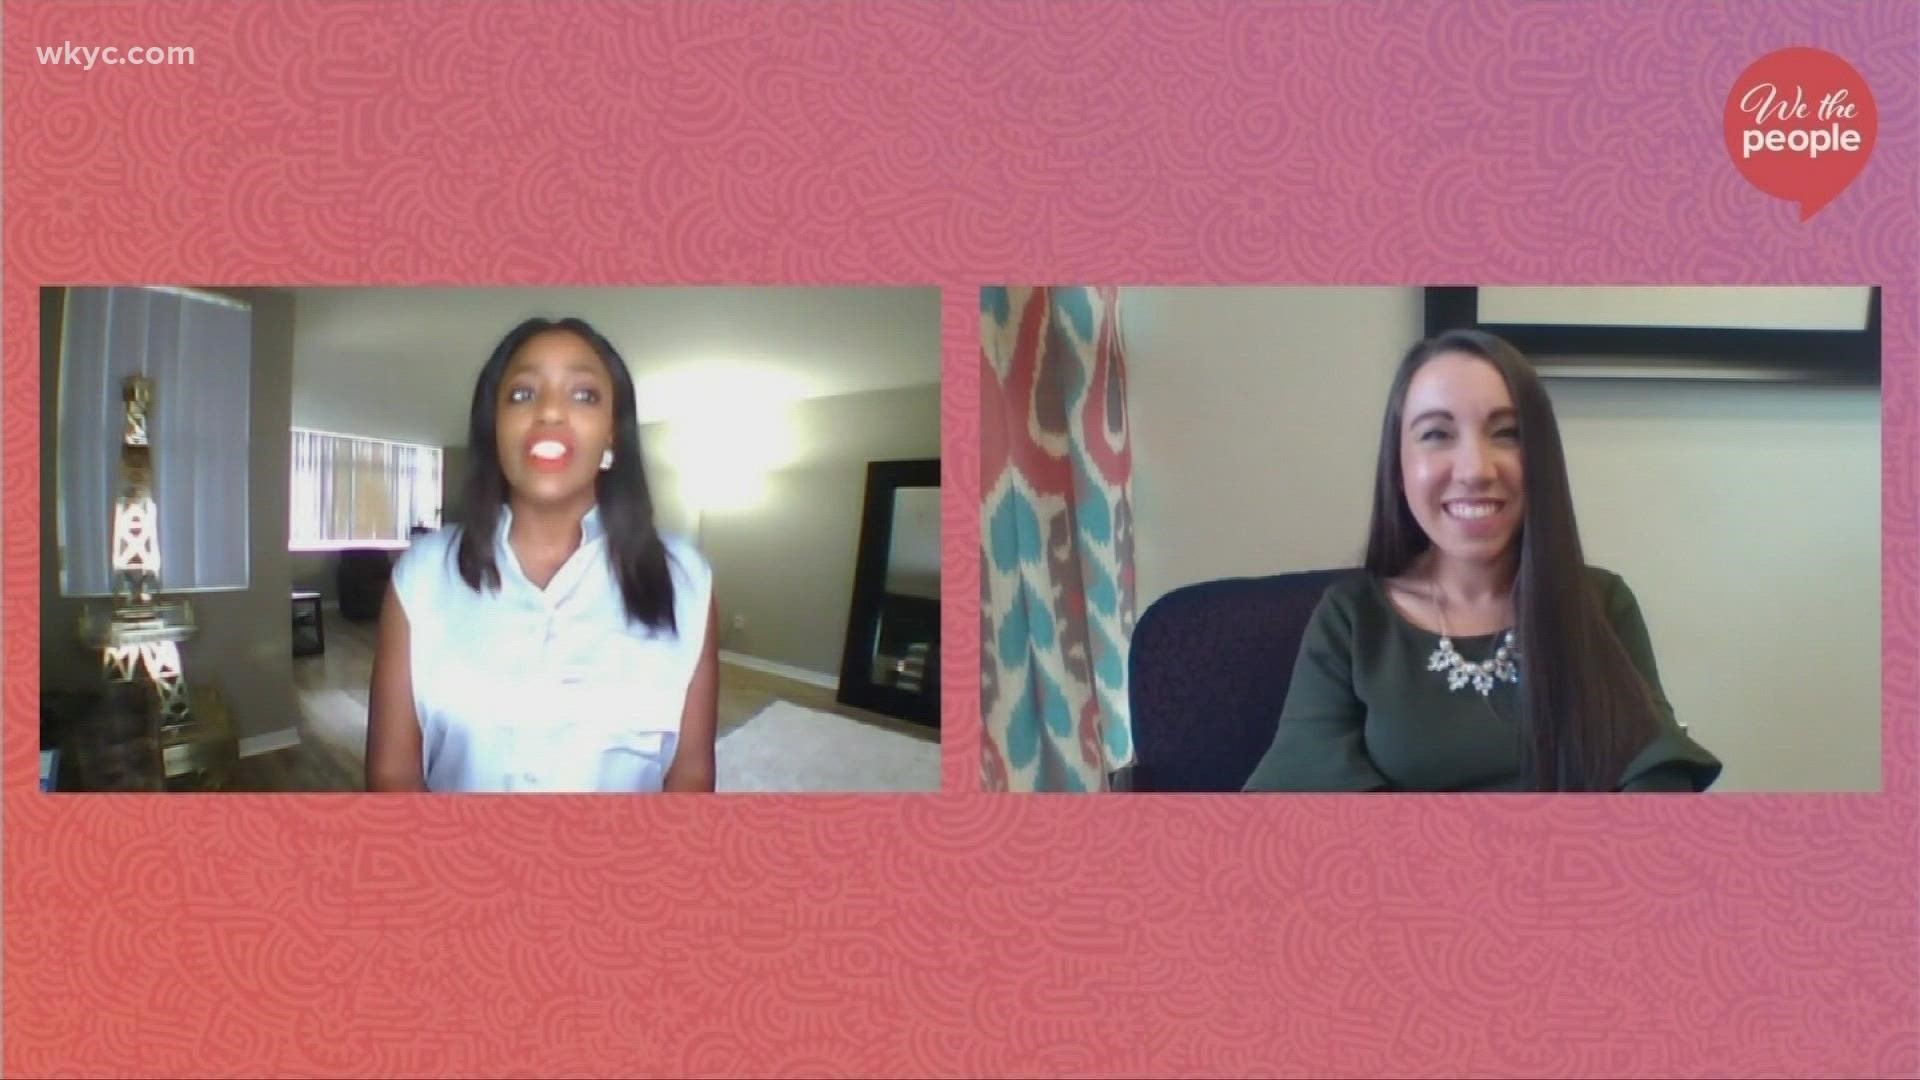 Jasmine is talking with Emily Haggerty, Director of Admission at Ursuline College, about the numerous opportunities students can find at their school.